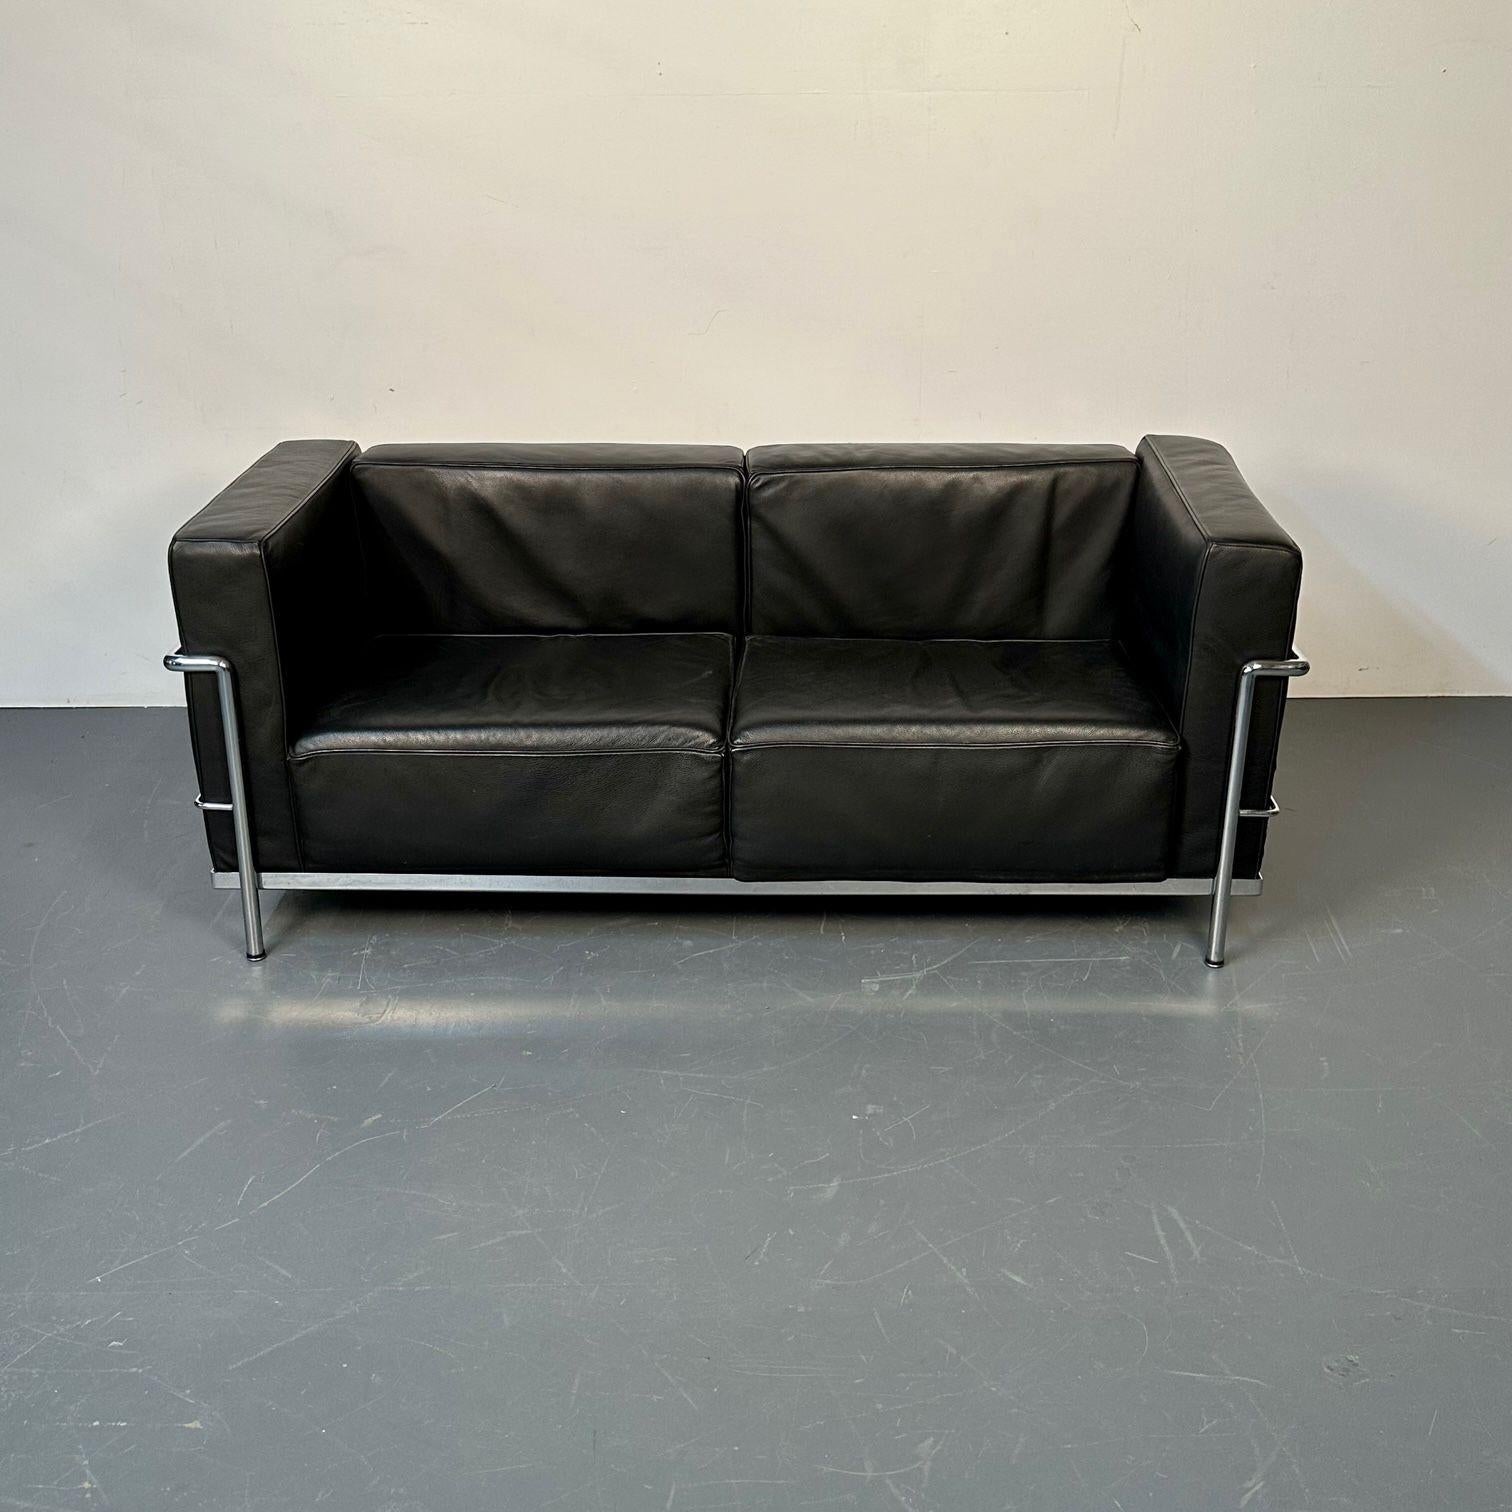 Mid-Century Modern LC2 Sofa by Le Corbusier, Black Leather, Two Seater, Perriand
 
Iconic LC2 two seater sofa originally designed by Le Corbusier, Pierre Jeanneret, and Charlotte Perriand in France, 1928. This sofa is a later re-edition made in